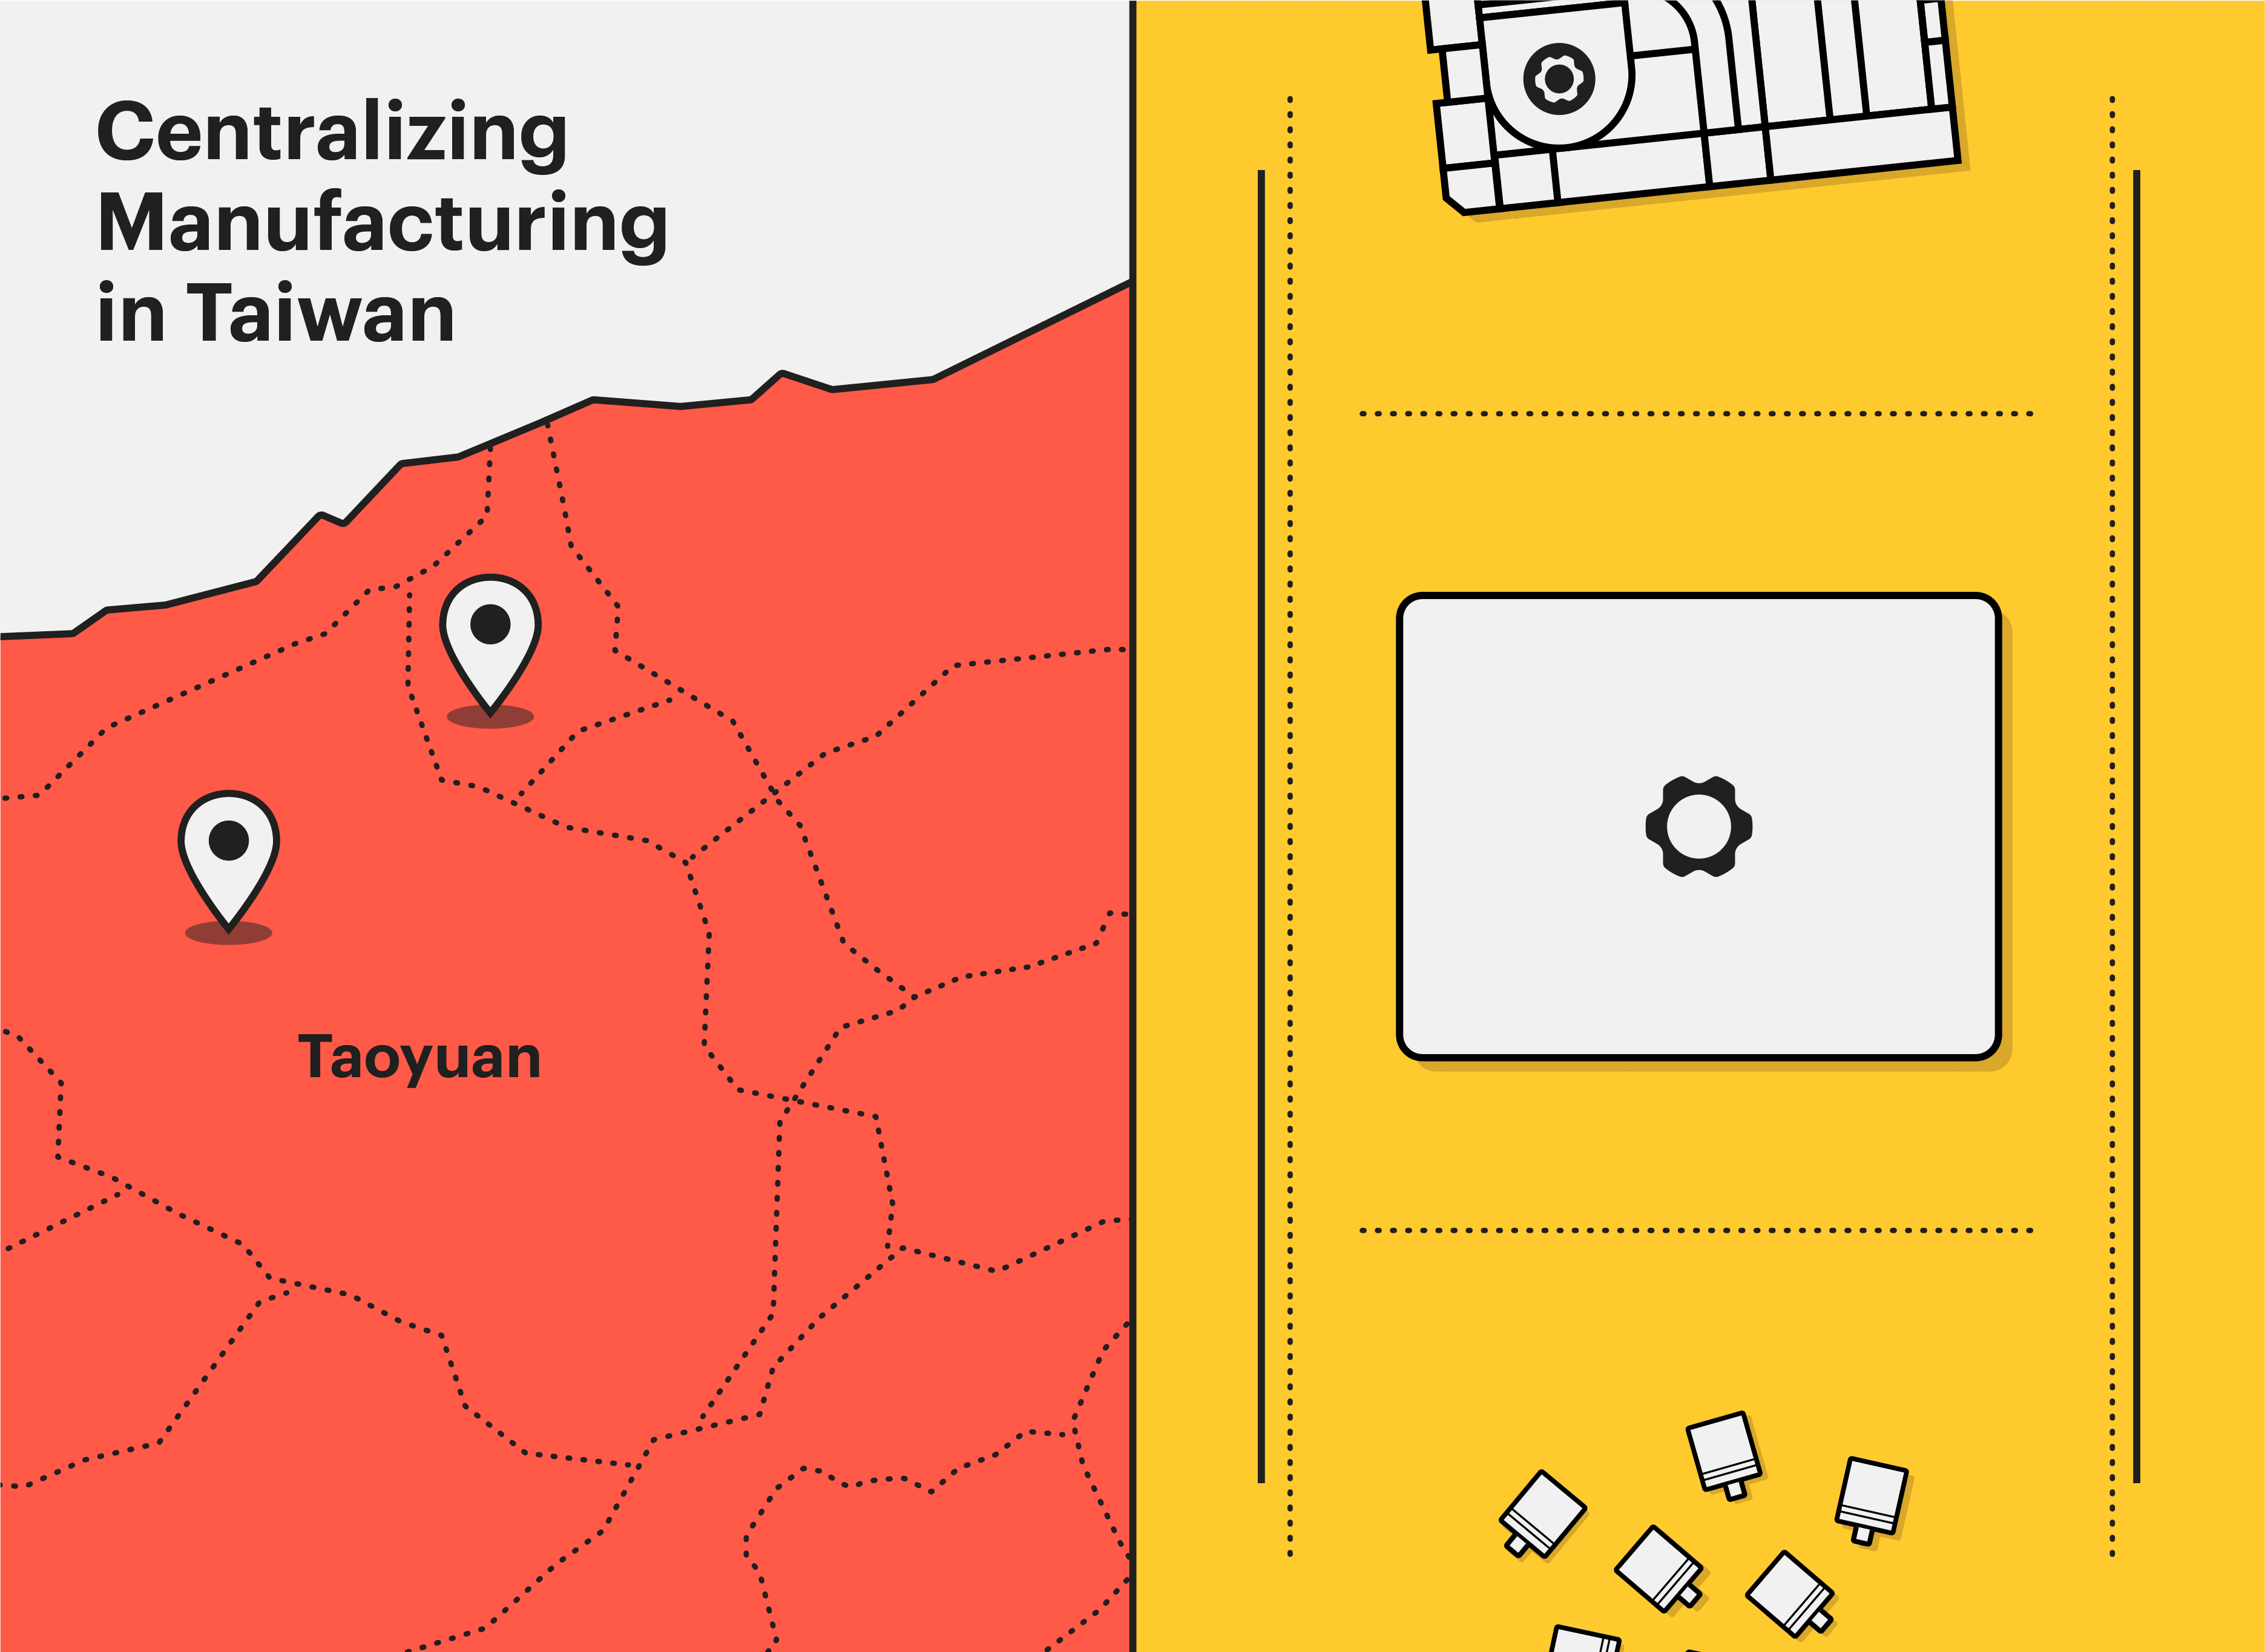 Centralizing manufacturing in Taiwan